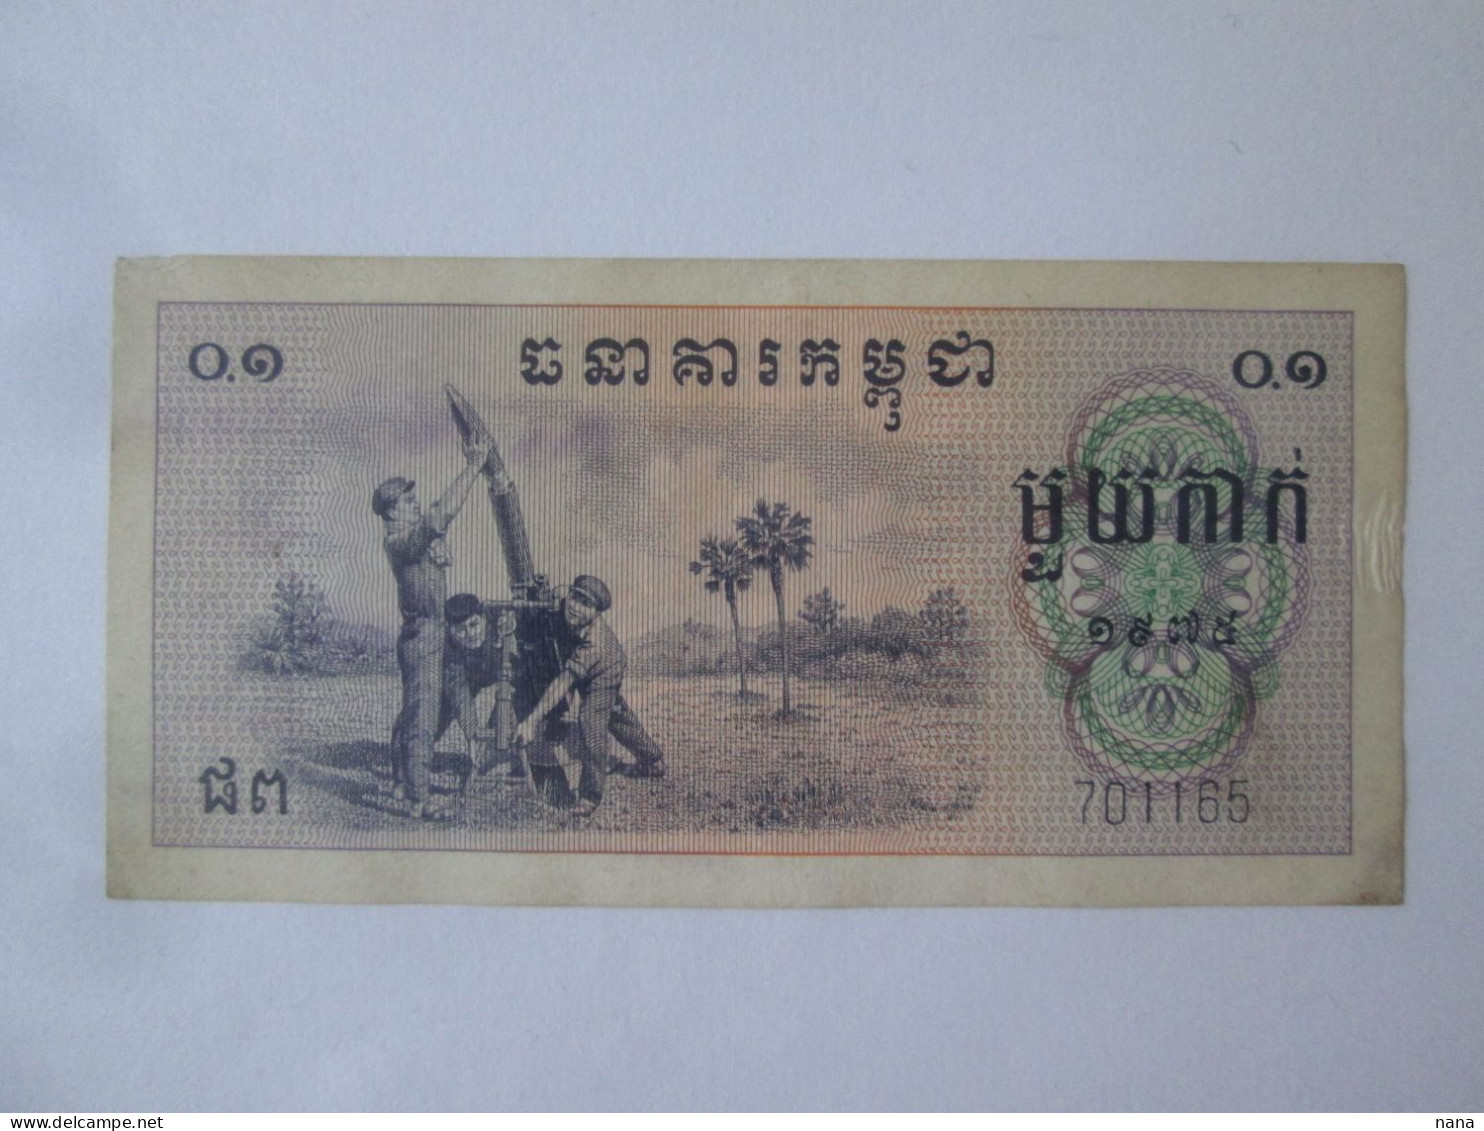 Rare! Cambodia 0.1 Riel 1975 Banknote Khmer Rouge Regime Pol Pot See Pictures - Cambodja